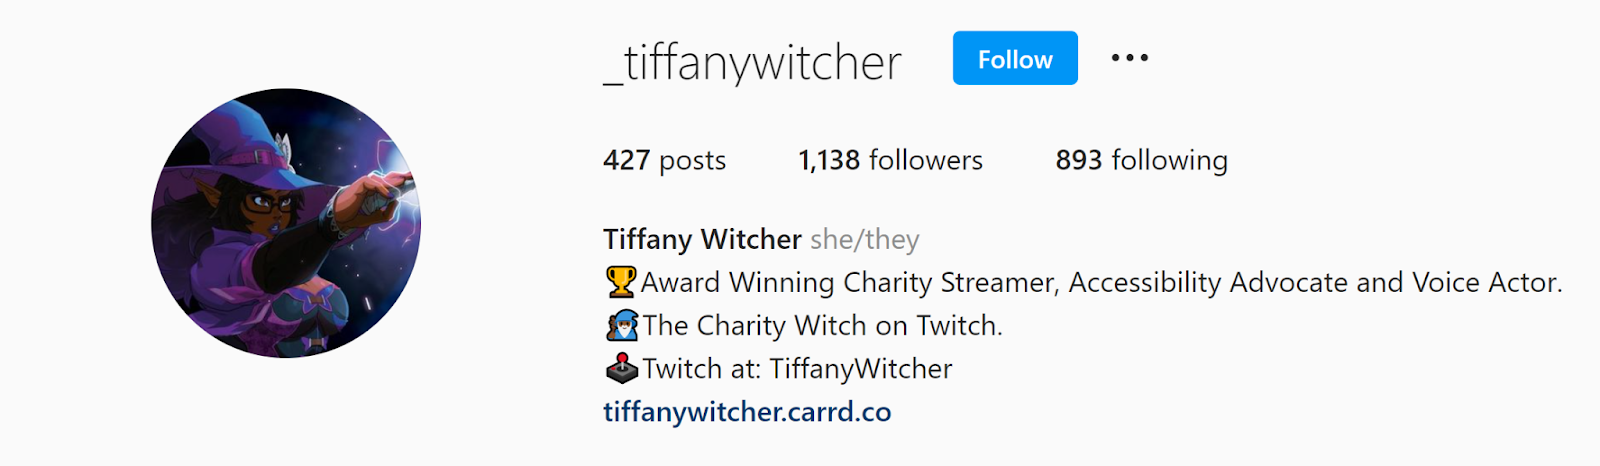 Growing on Twitch as a VTuber with Tiffany Witcher, The Charity Witch